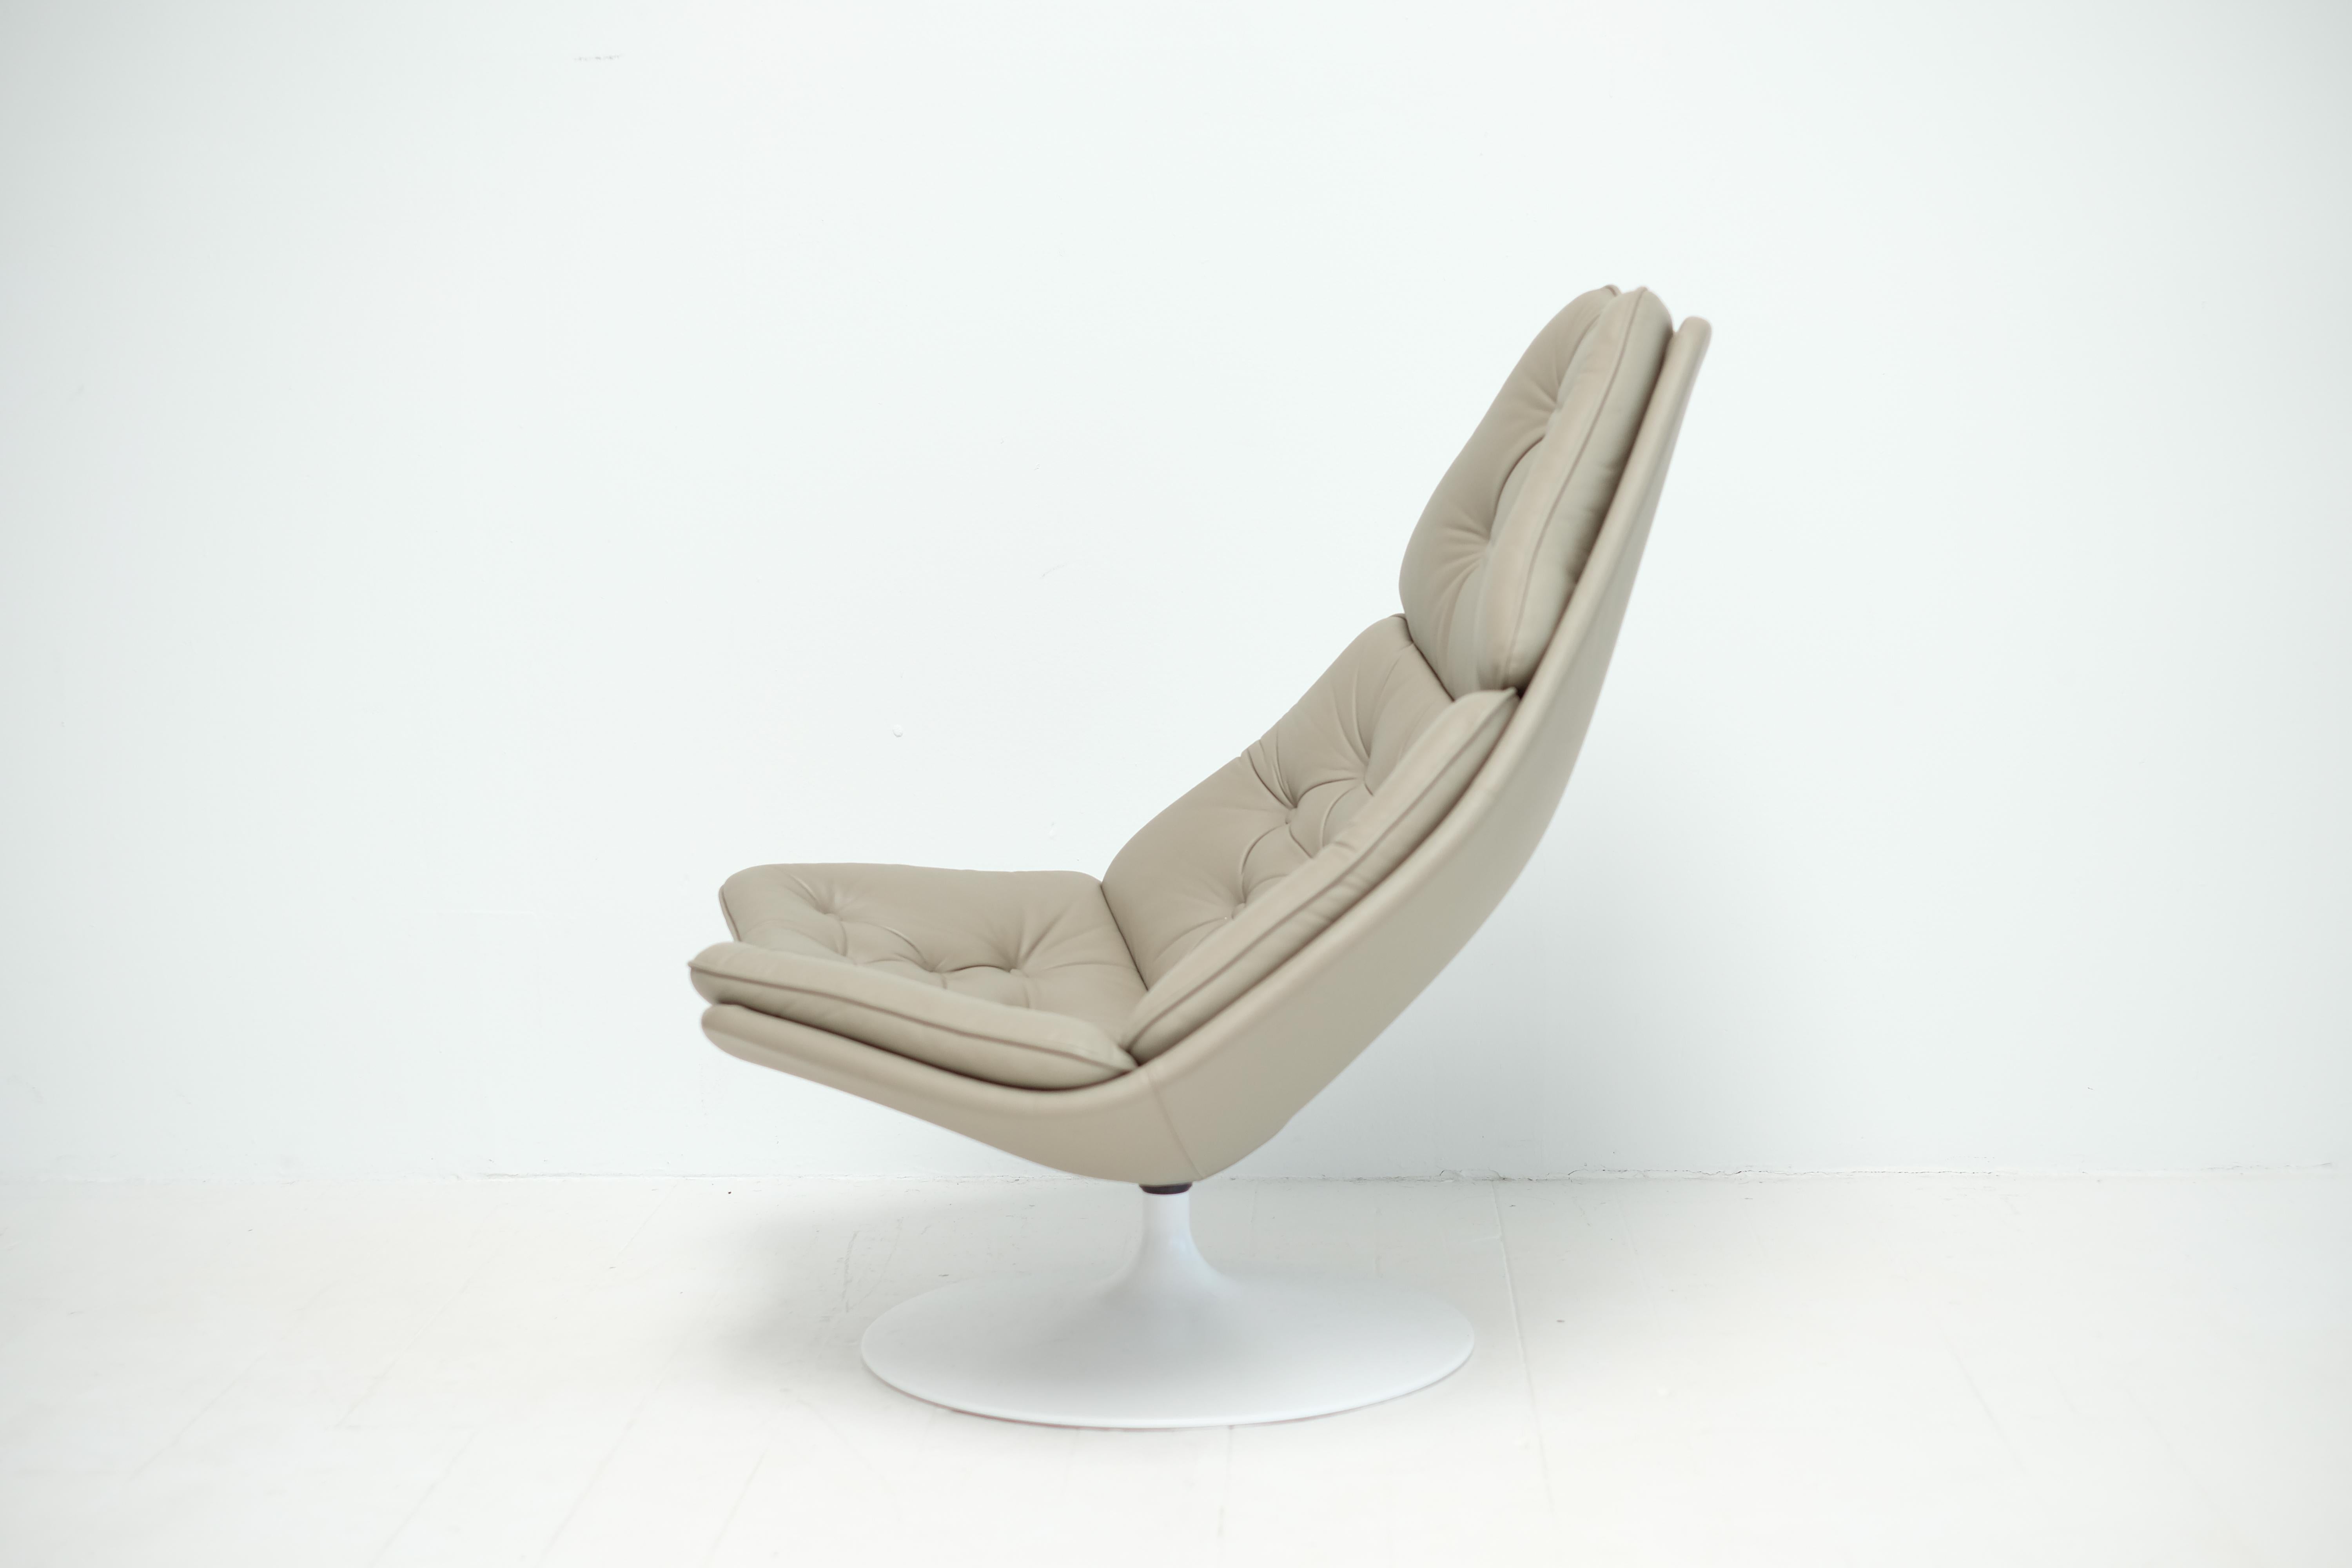 In 1962 British designer Geoffrey Harcourt (1935) joined the Artifort team, and developed the luxury ‘F-series’ lounge chairs in the late 1960s. There are two sizes of this model and this is the larger model with the high back. Very comfortable, the